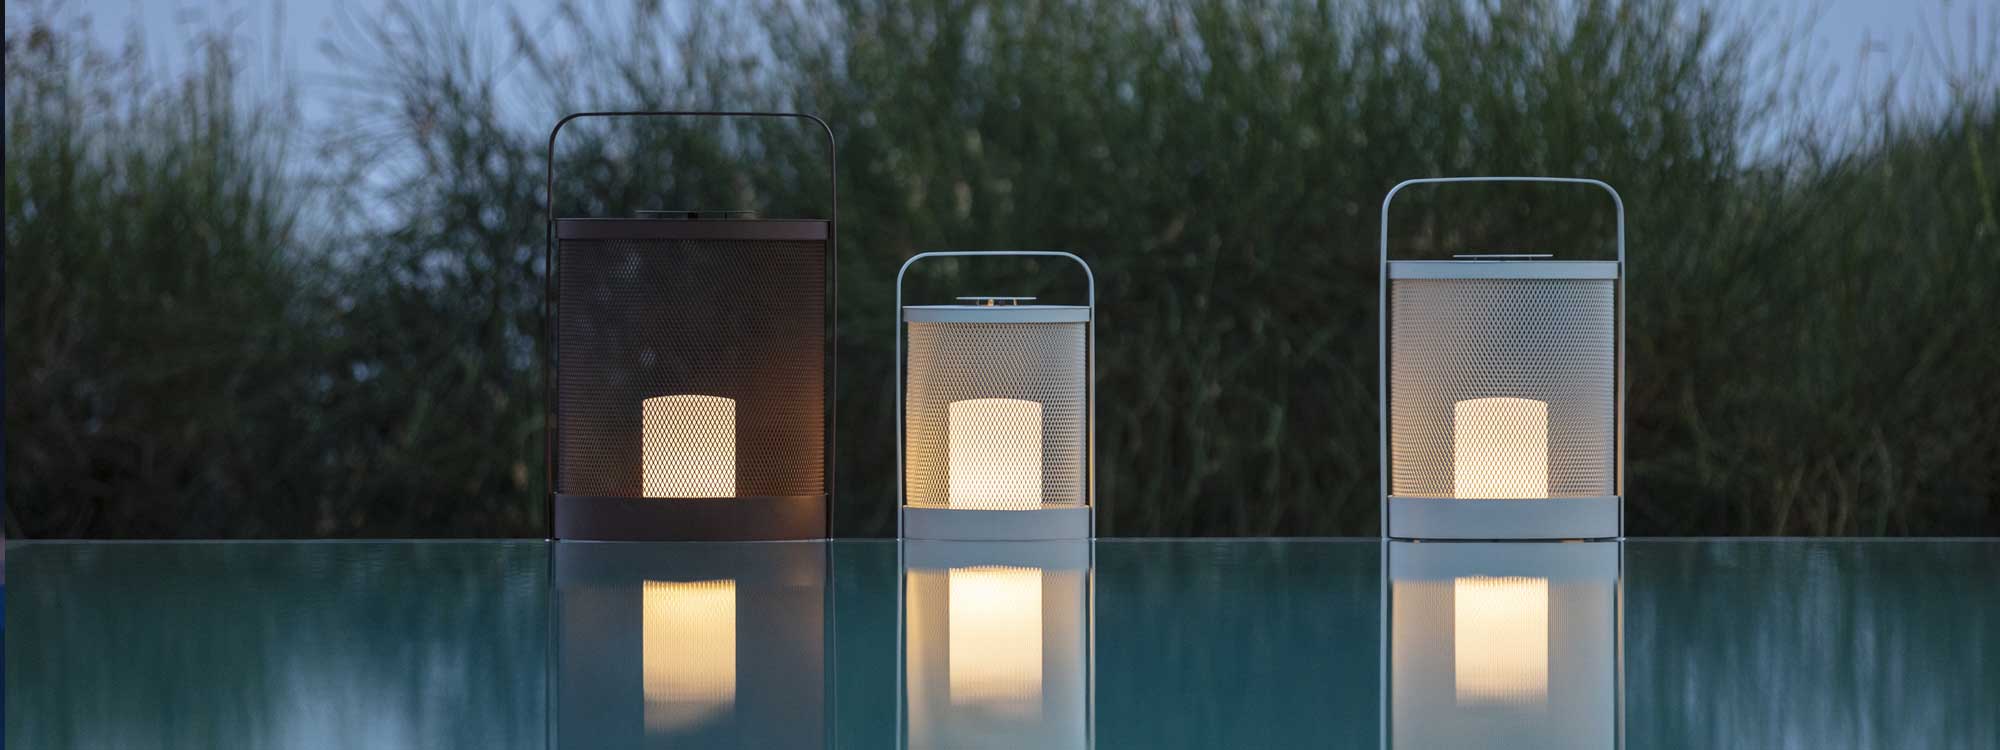 Luci modern garden lanterns reflected in water of swimming pool